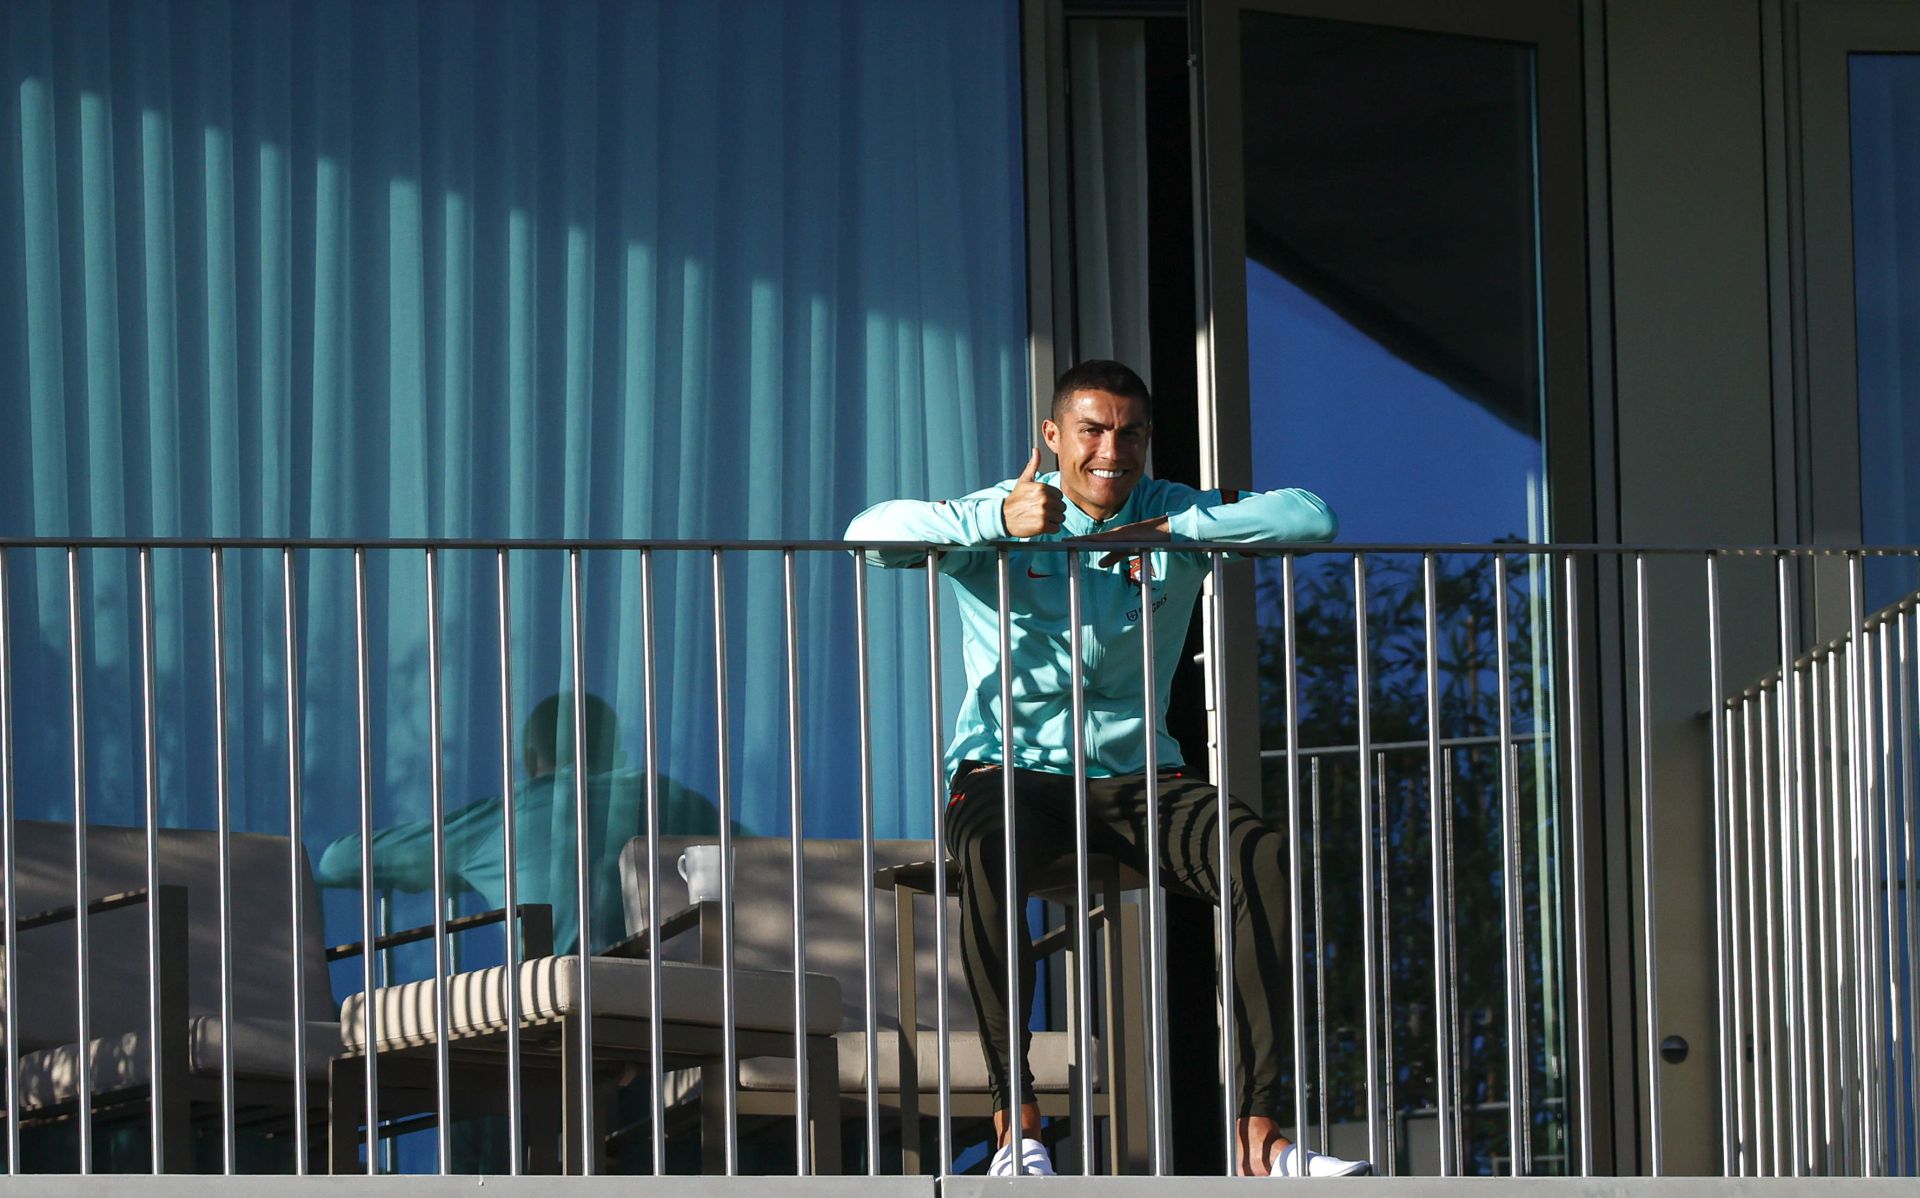 epa08741439 A handout photo made available by Portuguese Football Federation (FPF) shows Portugal national soccer team player Cristiano Ronaldo in the balcony of his room during his team training session for the upcoming UEFA Nations League soccer match with Sweden, Lisbon, Portugal, 13 October 2020. On 13 October 2020 the Portuguese Football Federation announced that Cristiano Ronaldo tested positive for COVID-19 coronavirus. Ronaldo is isolated and asymptomatic.  EPA/DIOGO PINTO / HANDOUT  HANDOUT EDITORIAL USE ONLY/NO SALES